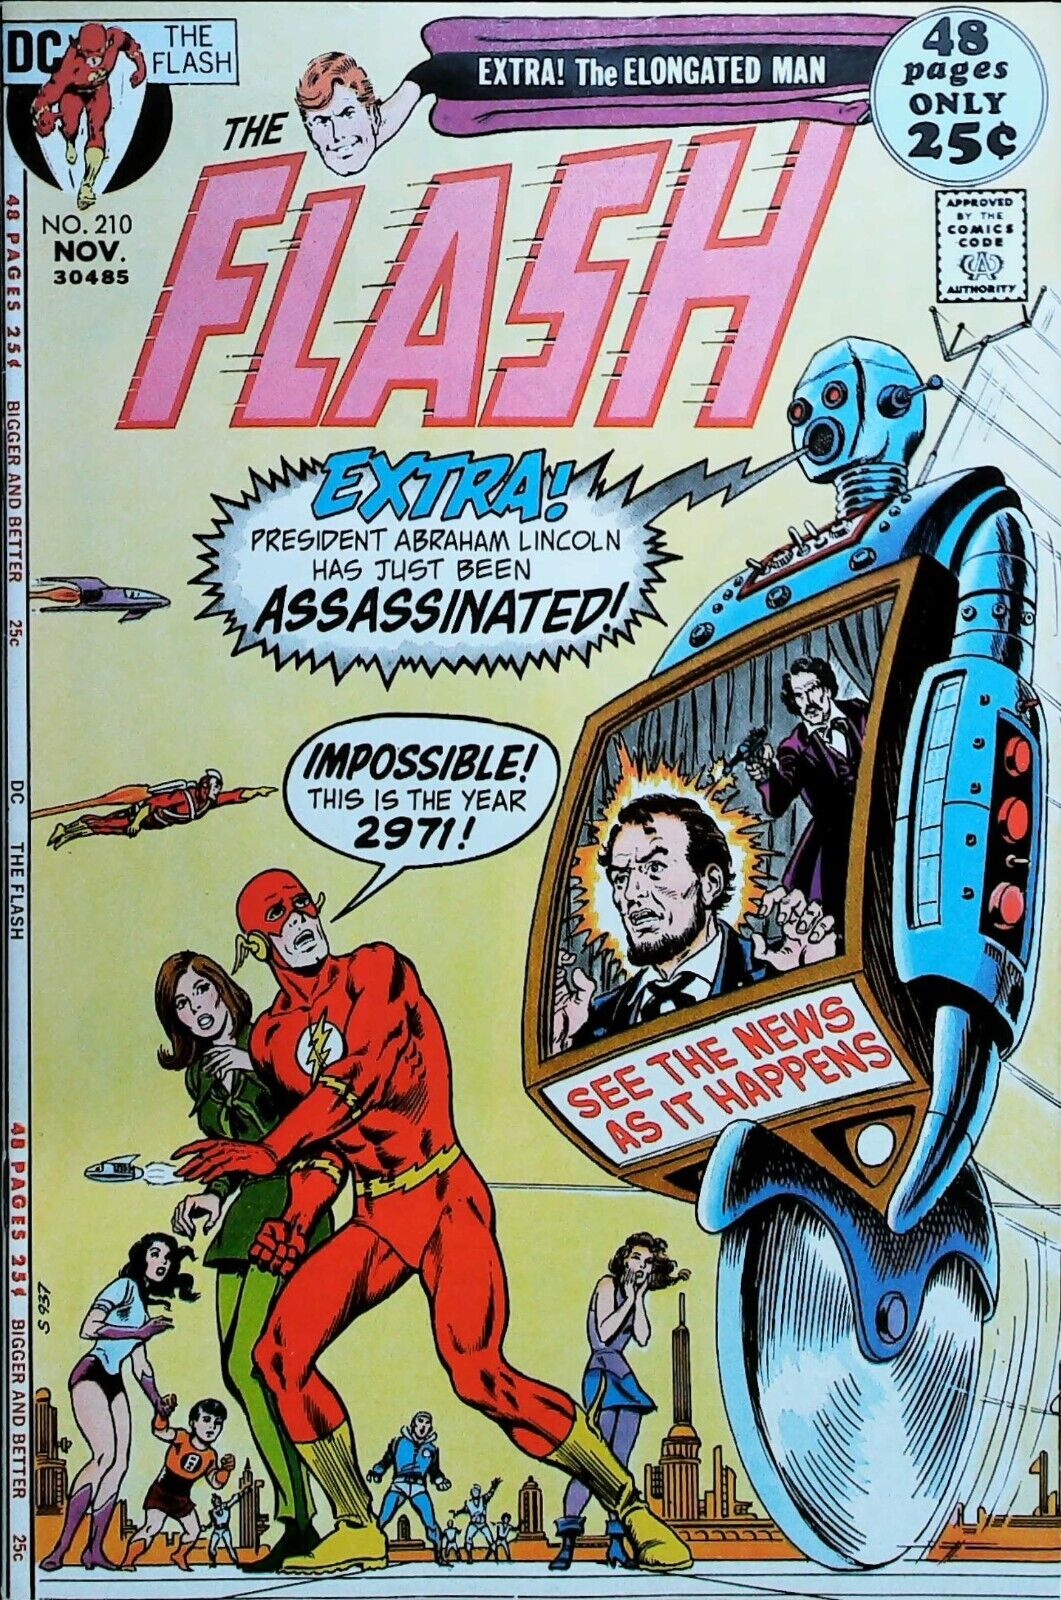 The Flash #210 Vol 1 (1971) - Robot Abraham Lincoln Appearance - Very Fine Range